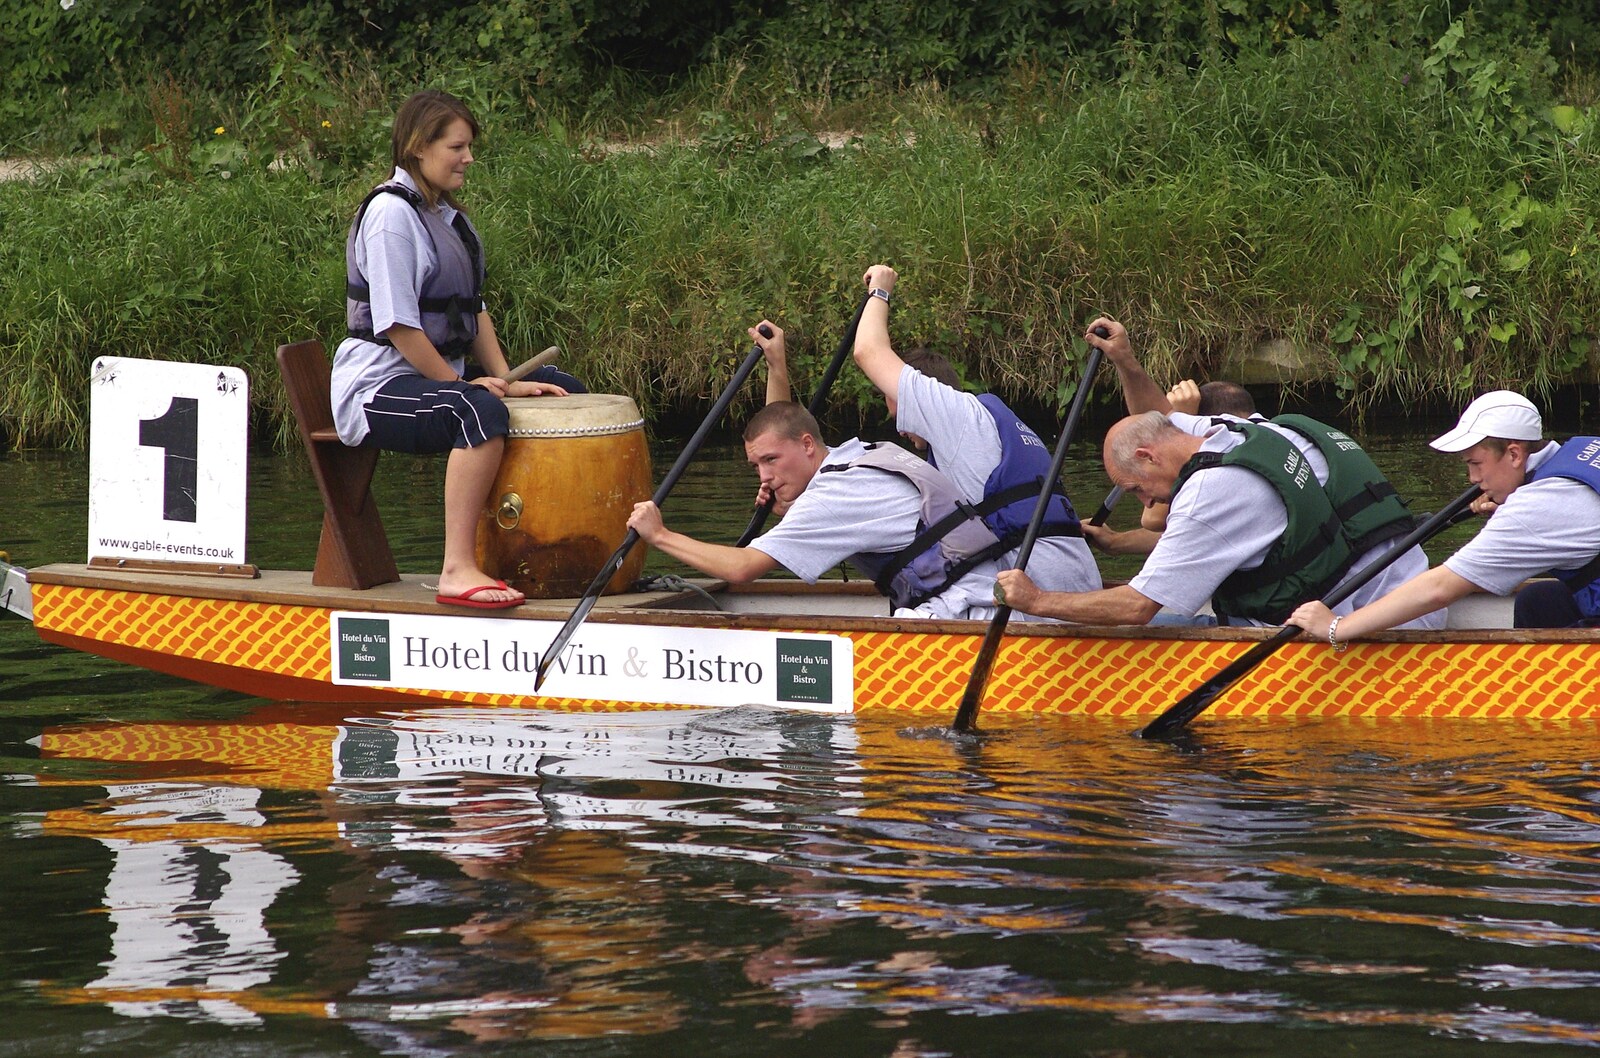 Qualcomm's Dragon-Boat Racing, Fen Ditton, Cambridge - 8th September 2007: Paddling to the beat of a drum